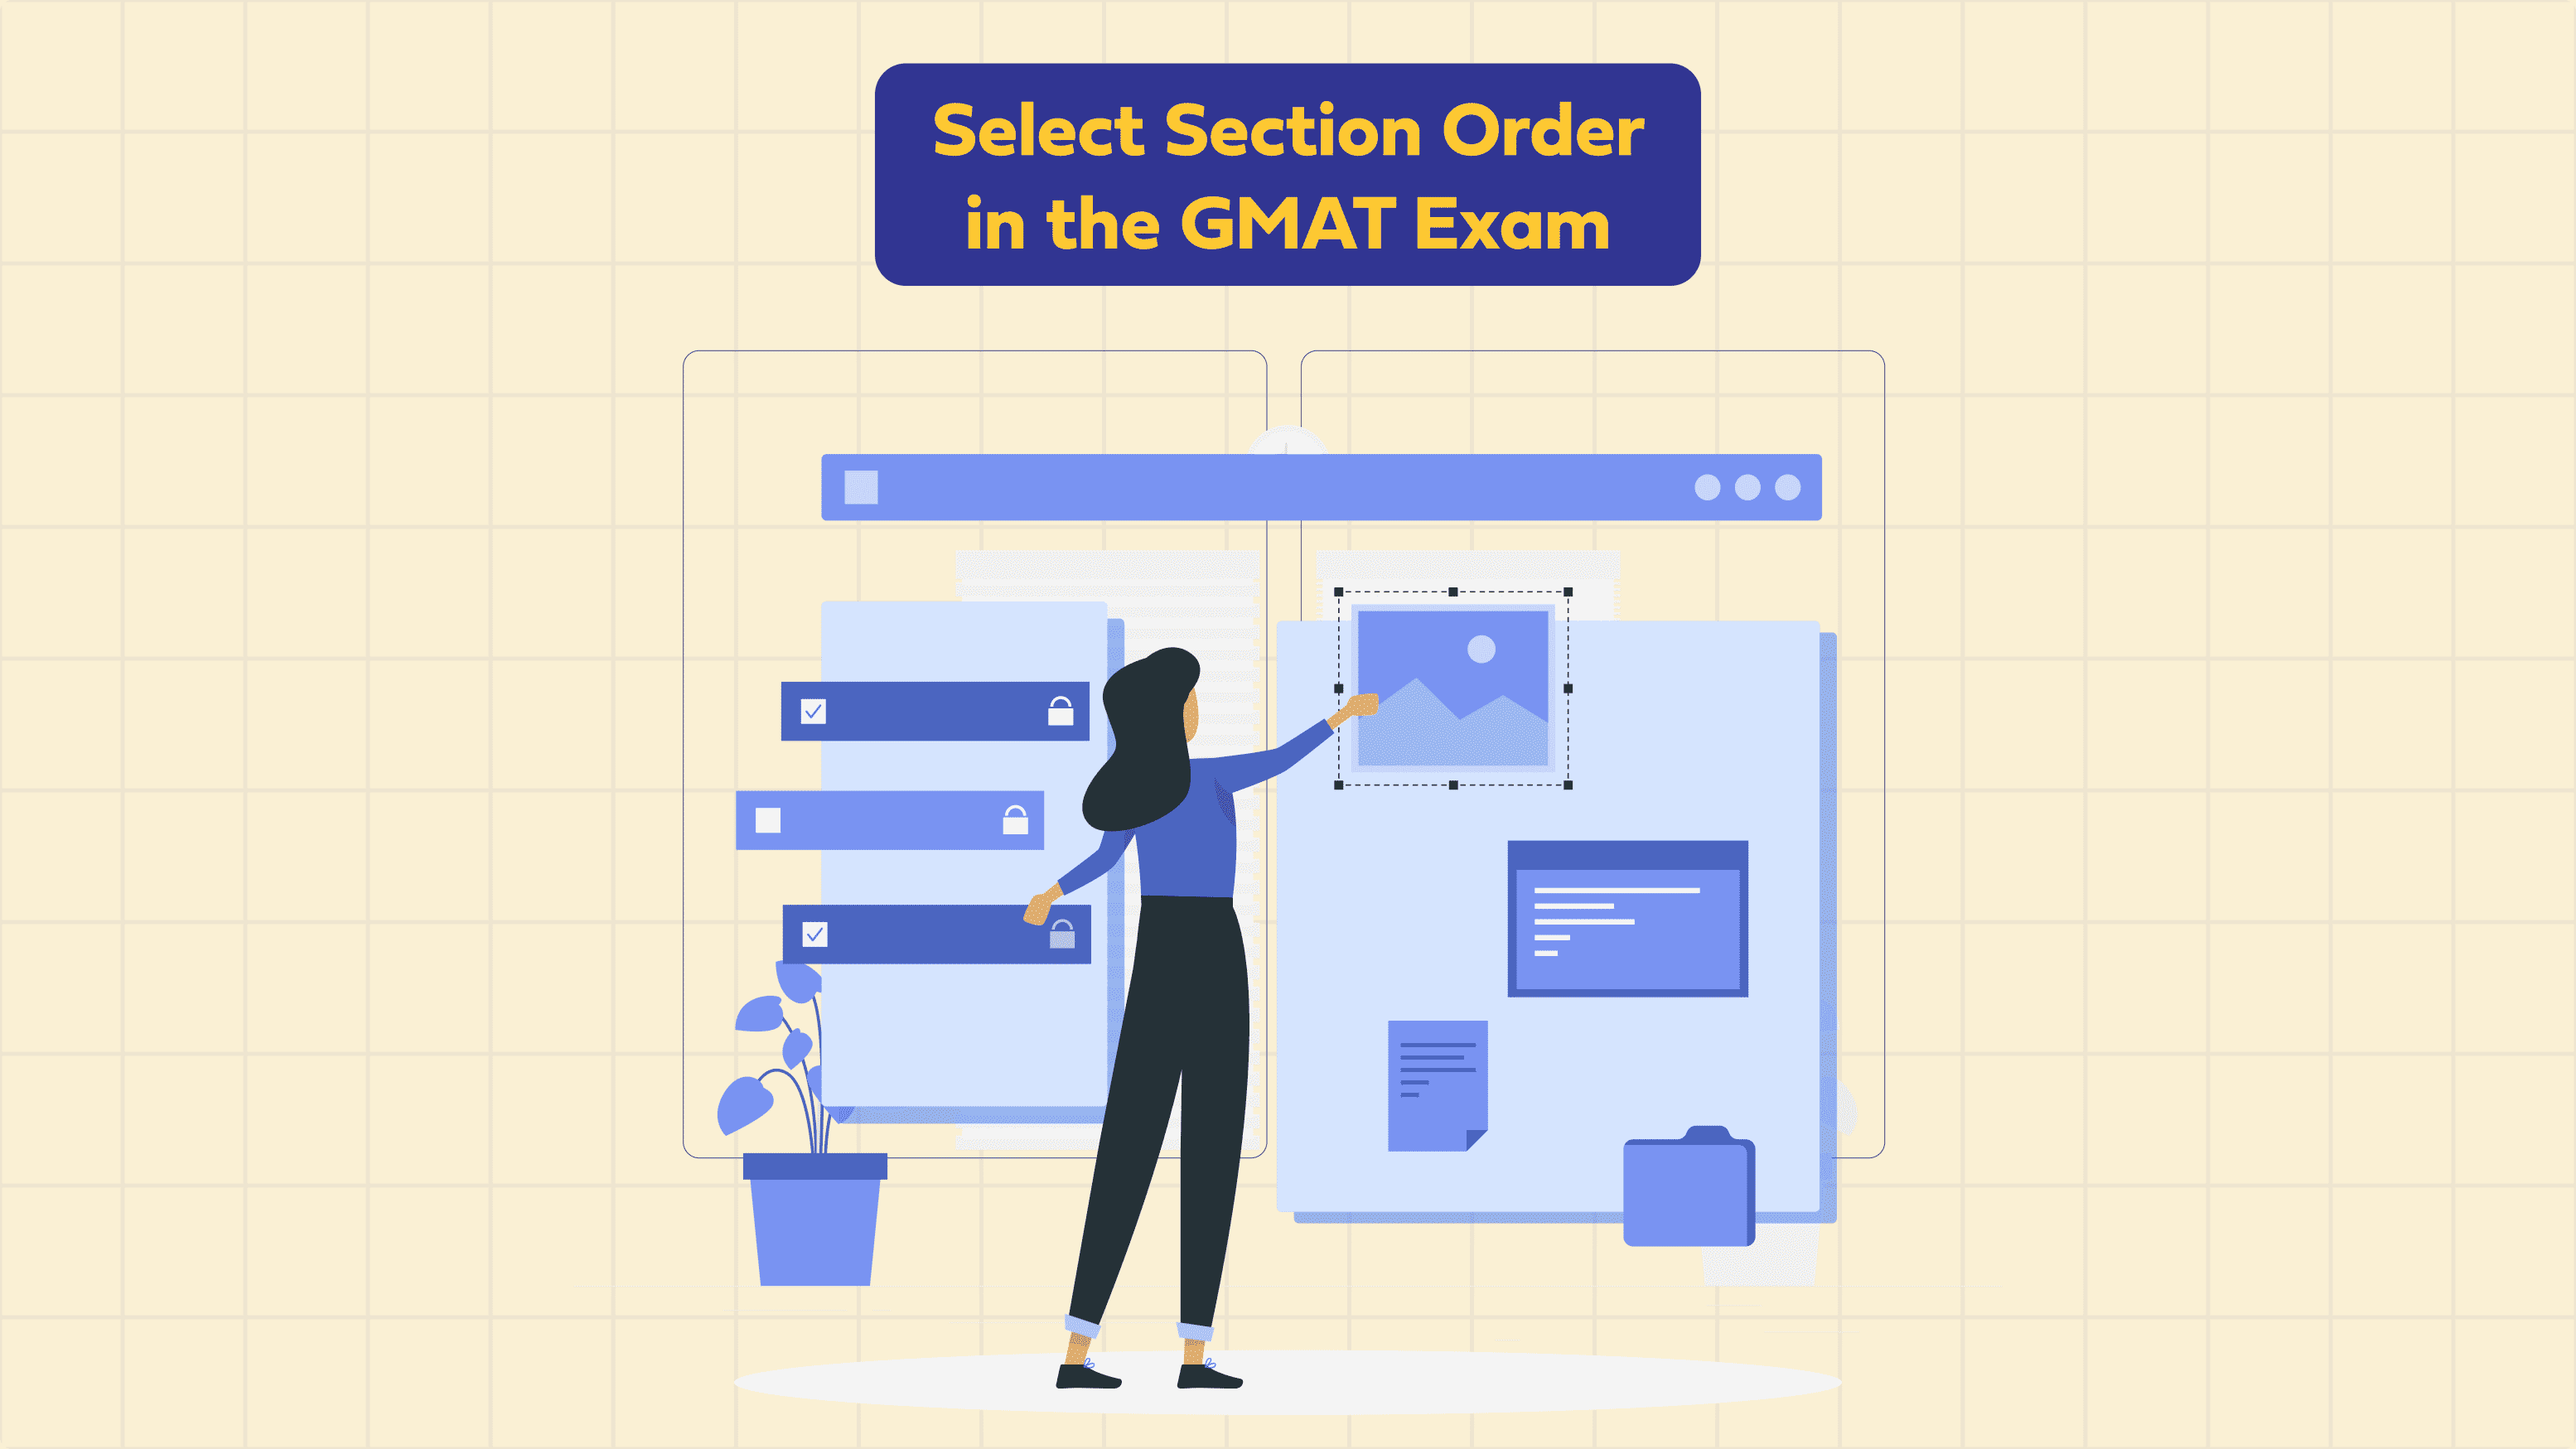 Select Section Order in the GMAT Exam